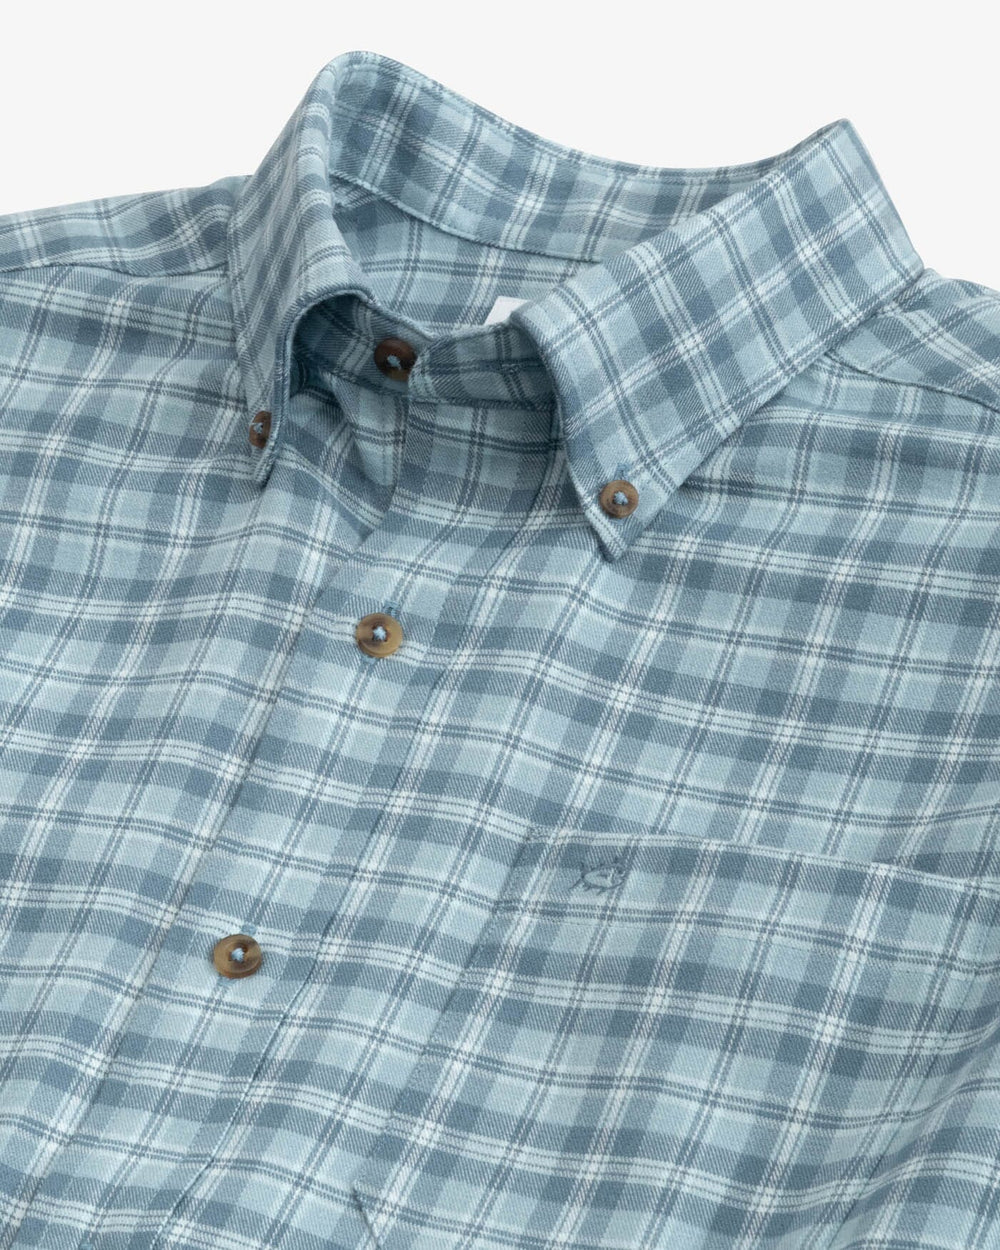 The detail view of the Southern Tide Heather Lakewood Plaid Sport Shirt by Southern Tide - Heather Mountain Spring Blue